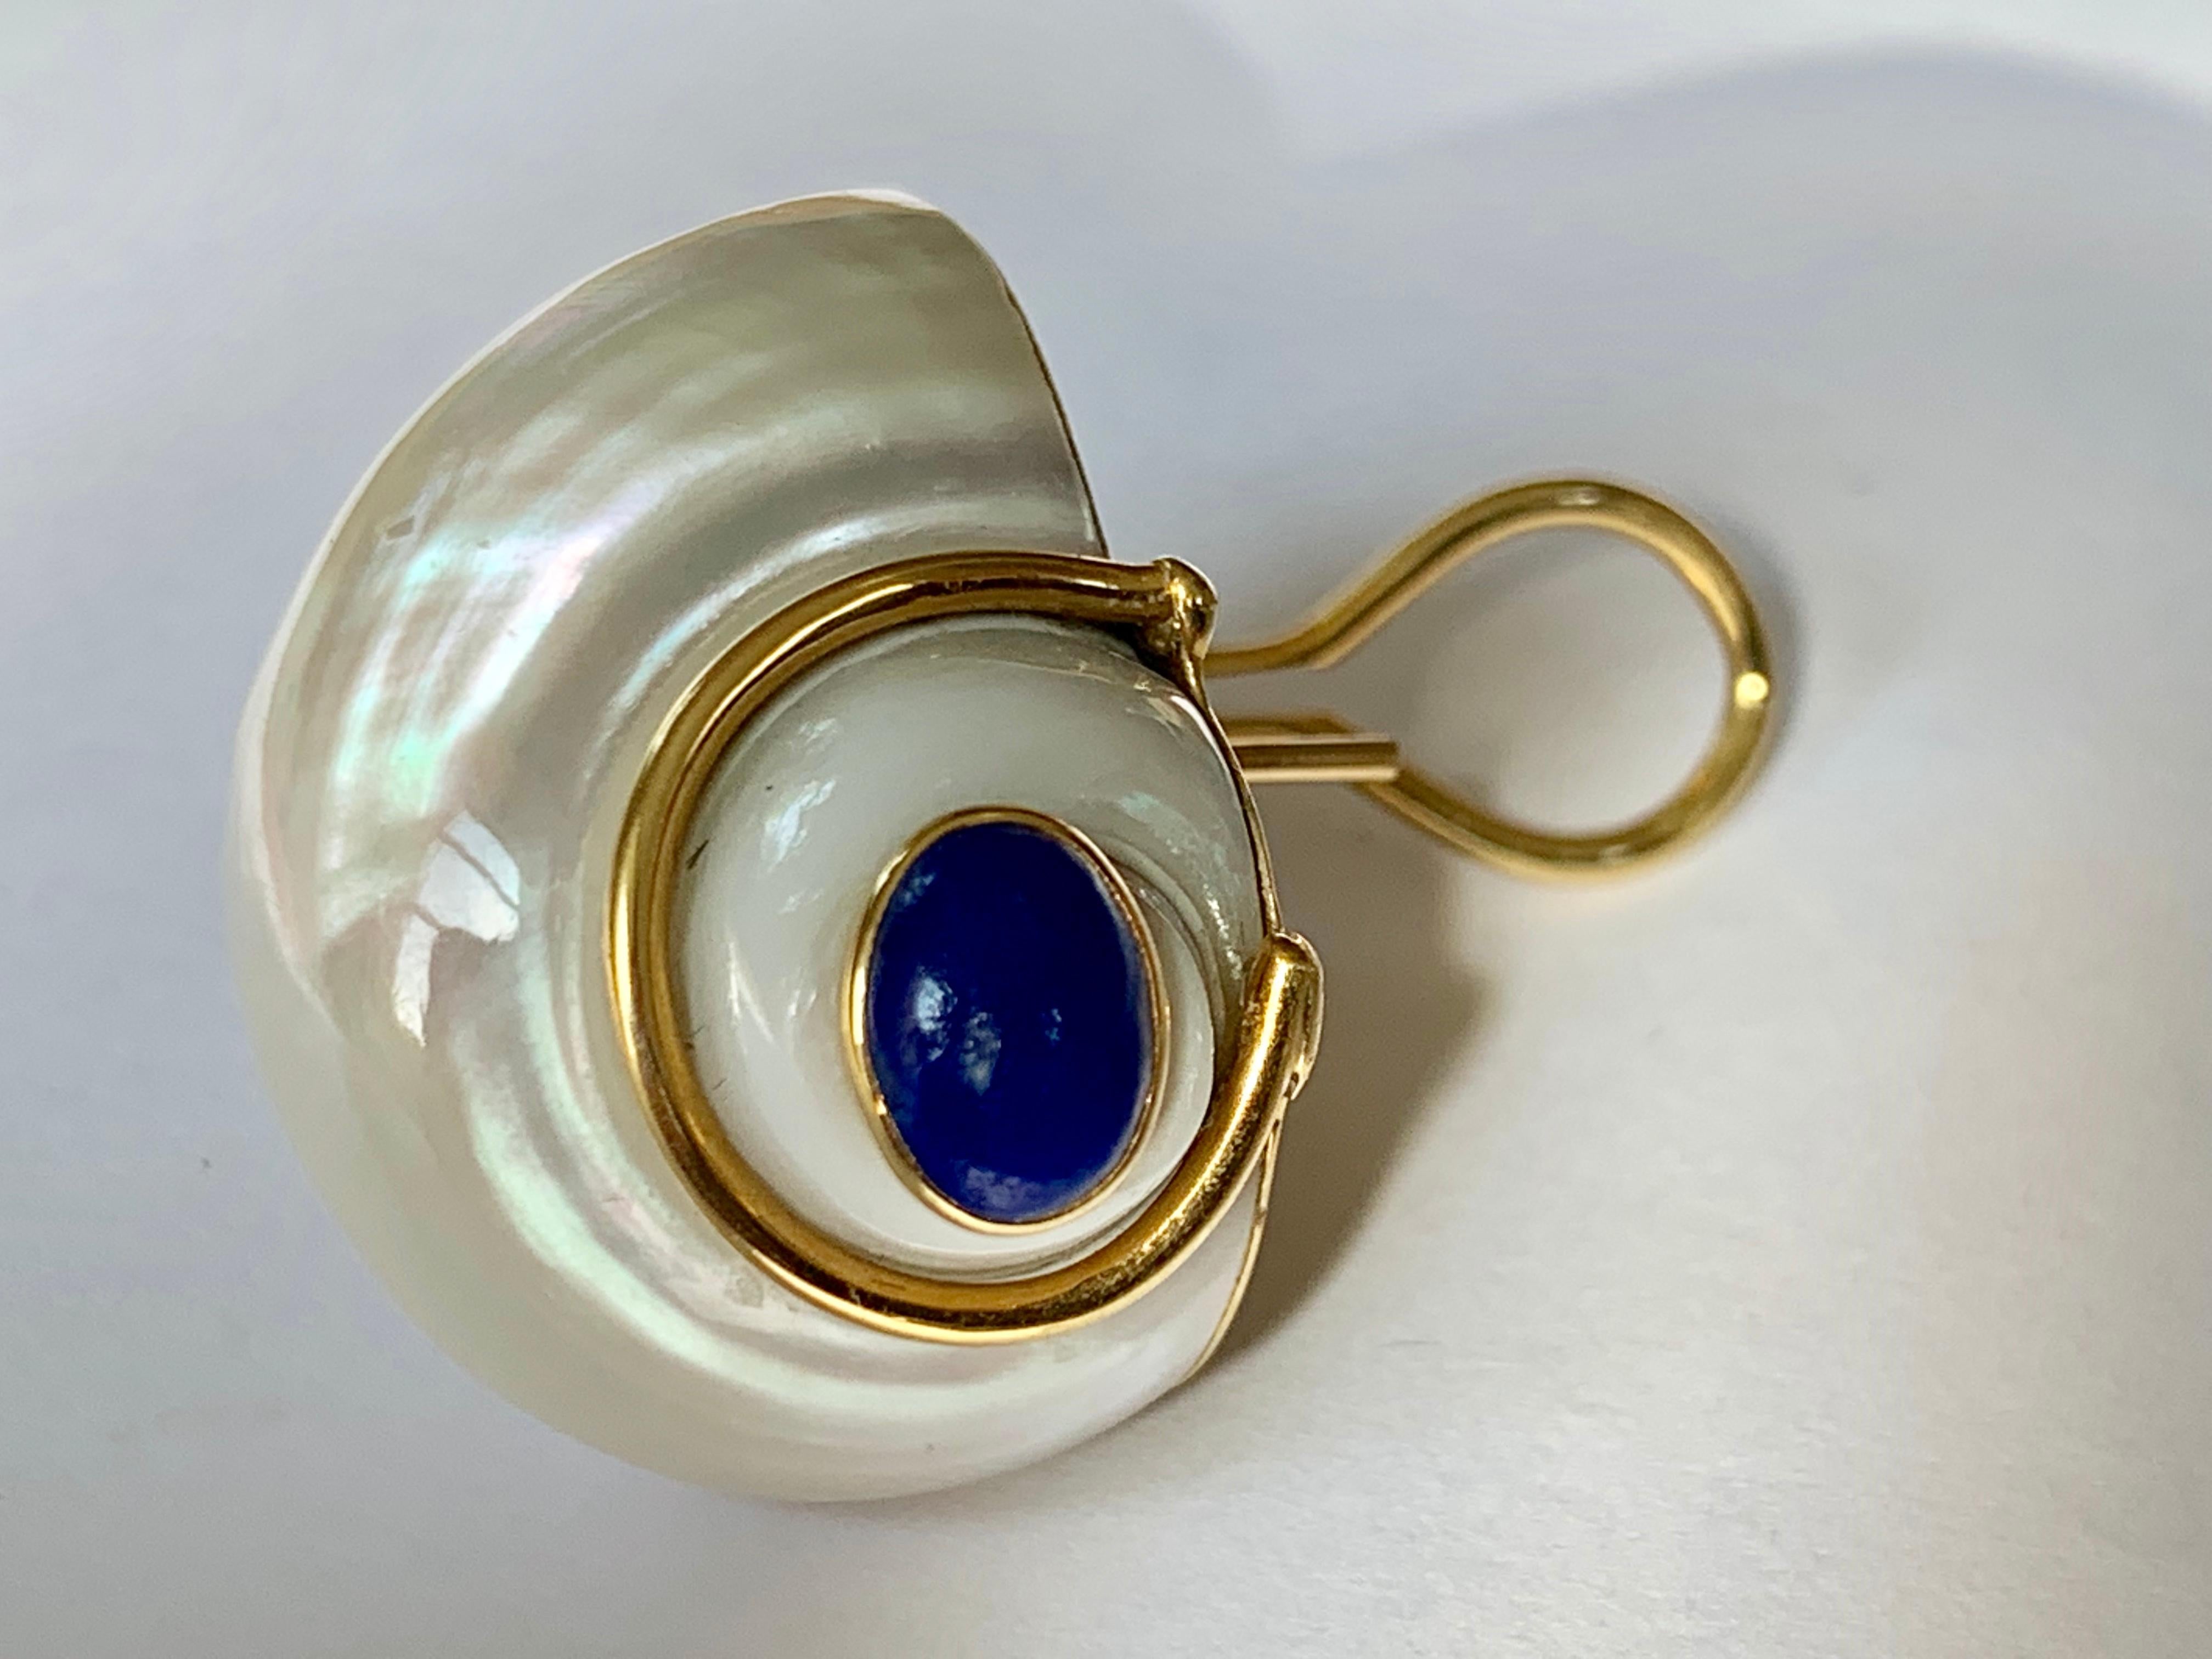 From Seaman Scheps, a pair of 18 karat yellow gold, turbo shell and Lapis Lazuli earrings. Each set with a white turbo shell, terminating in a Lapis Lazuli cabochon accented by gold wire. One shell has a little damage.